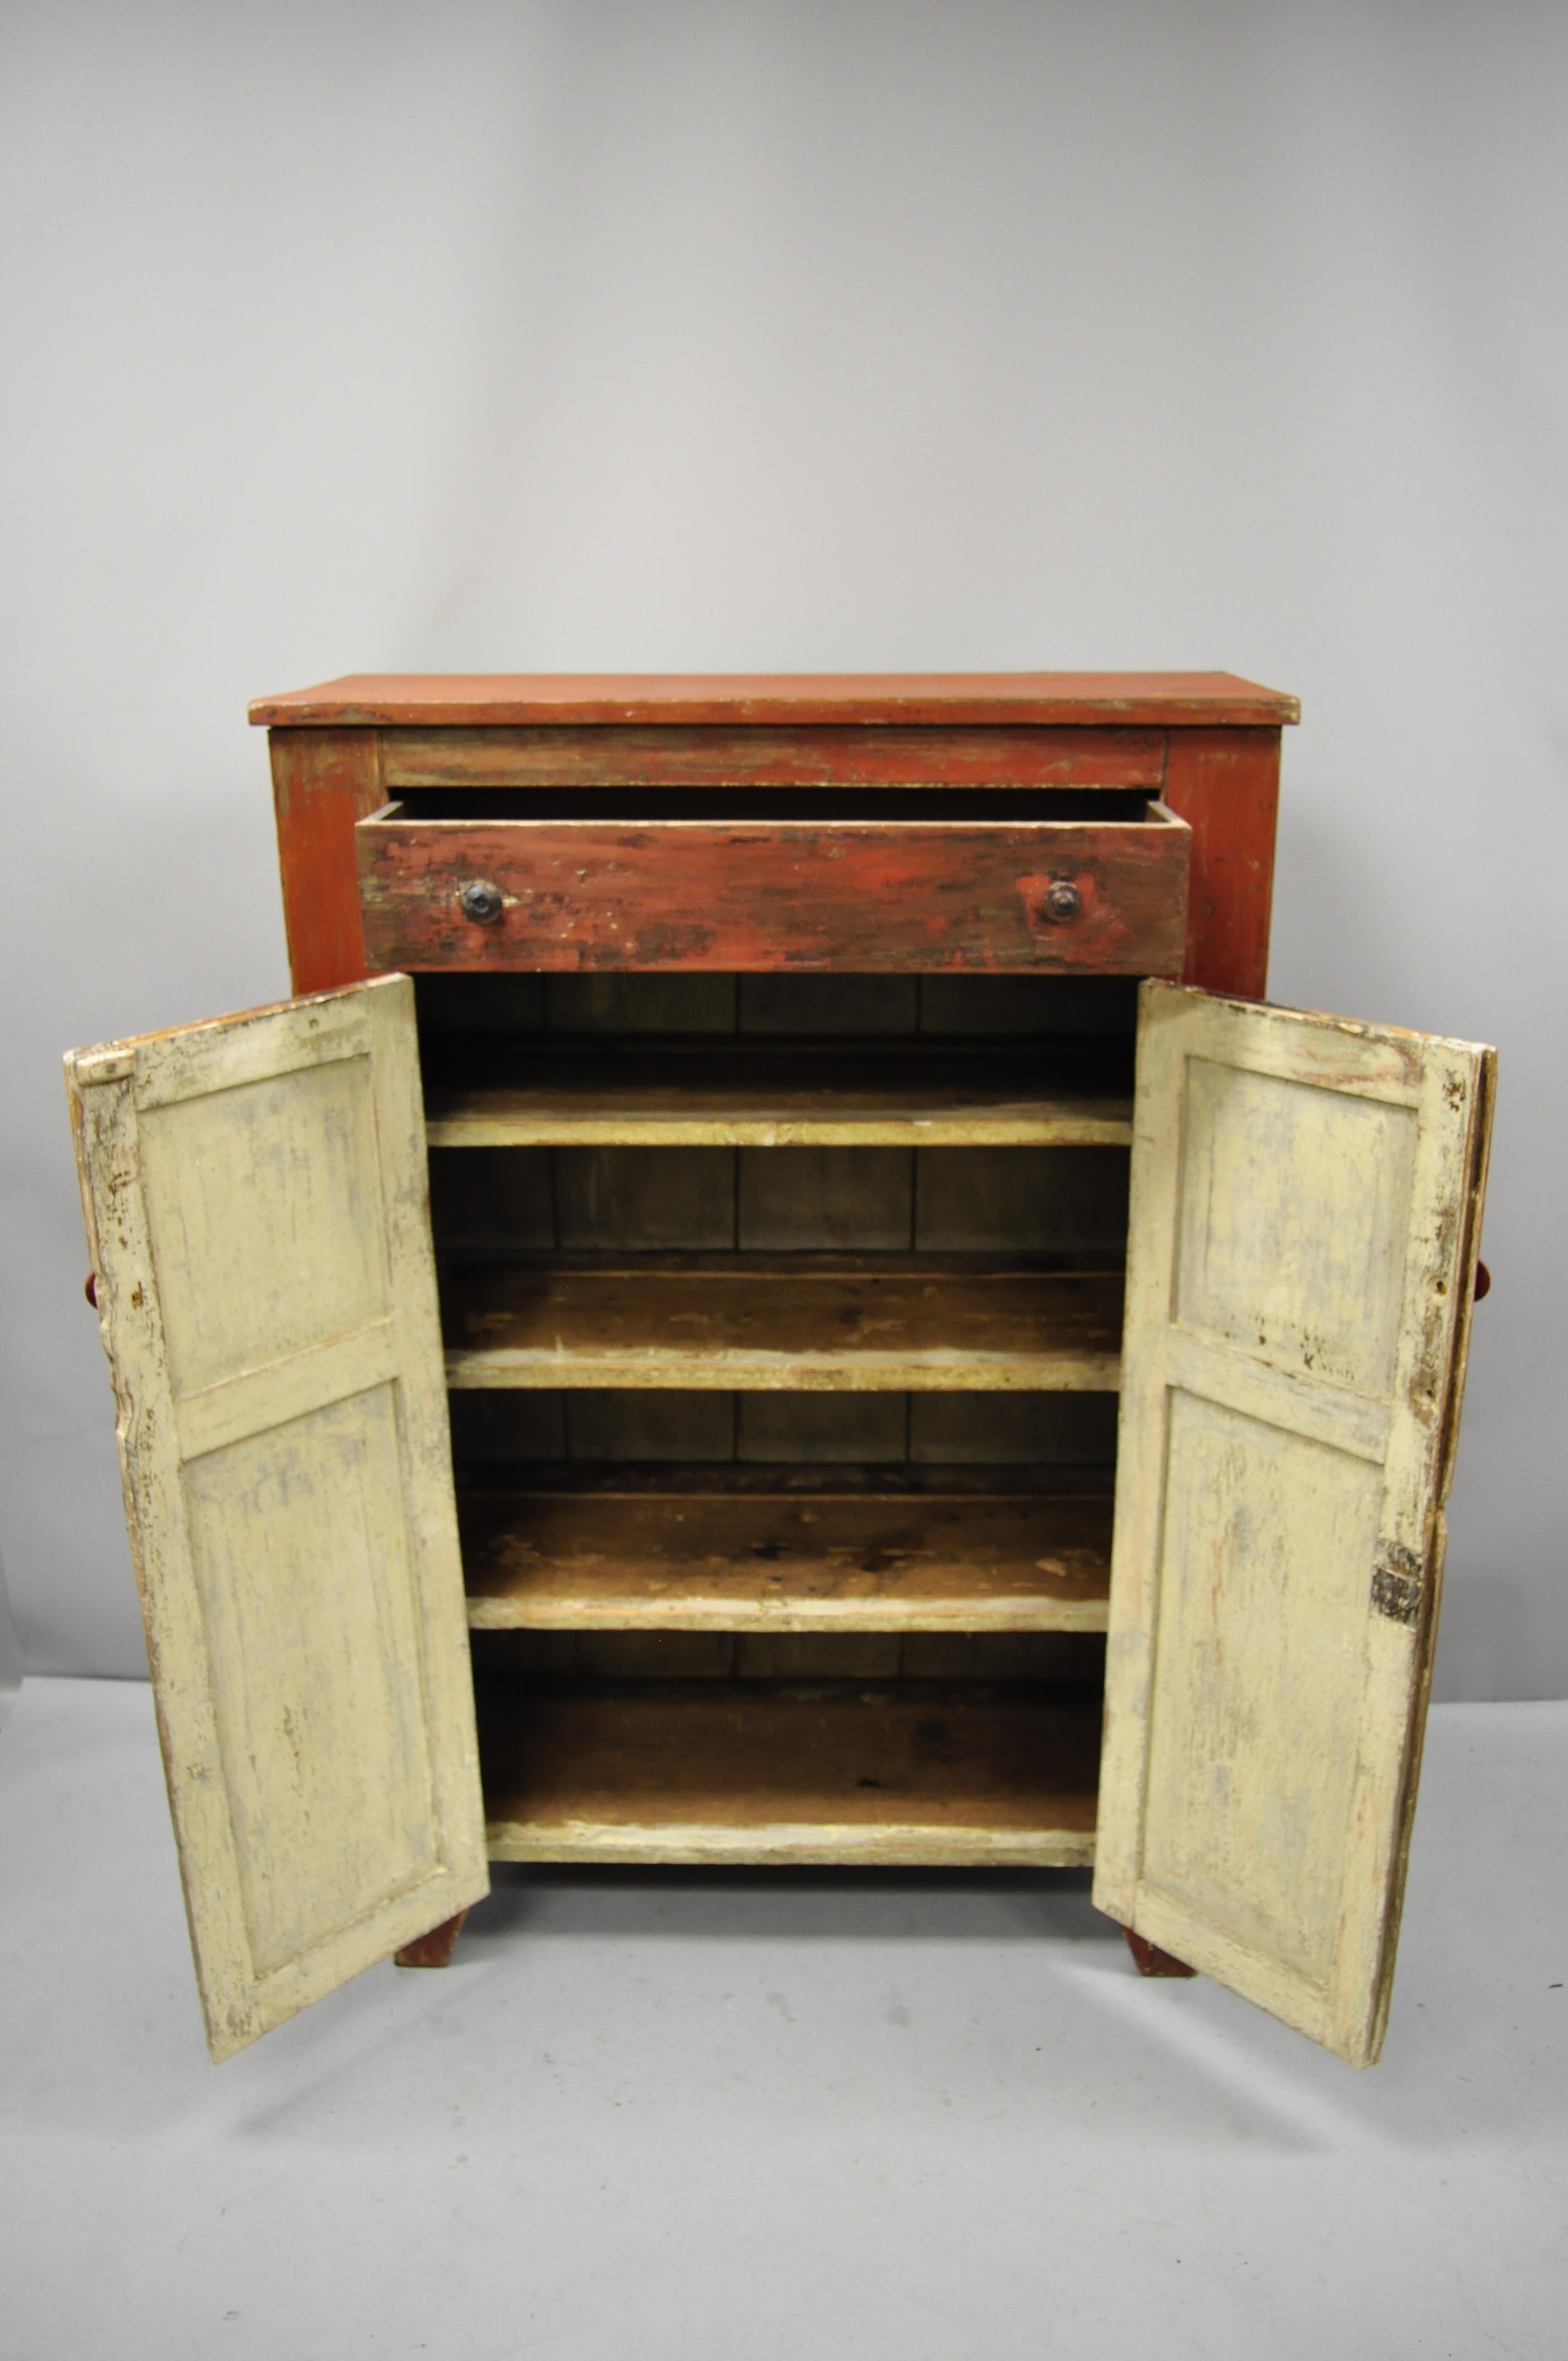 19th Century American Primitive Red Distress Painted Cupboard Hutch Pie Safe Cabinet